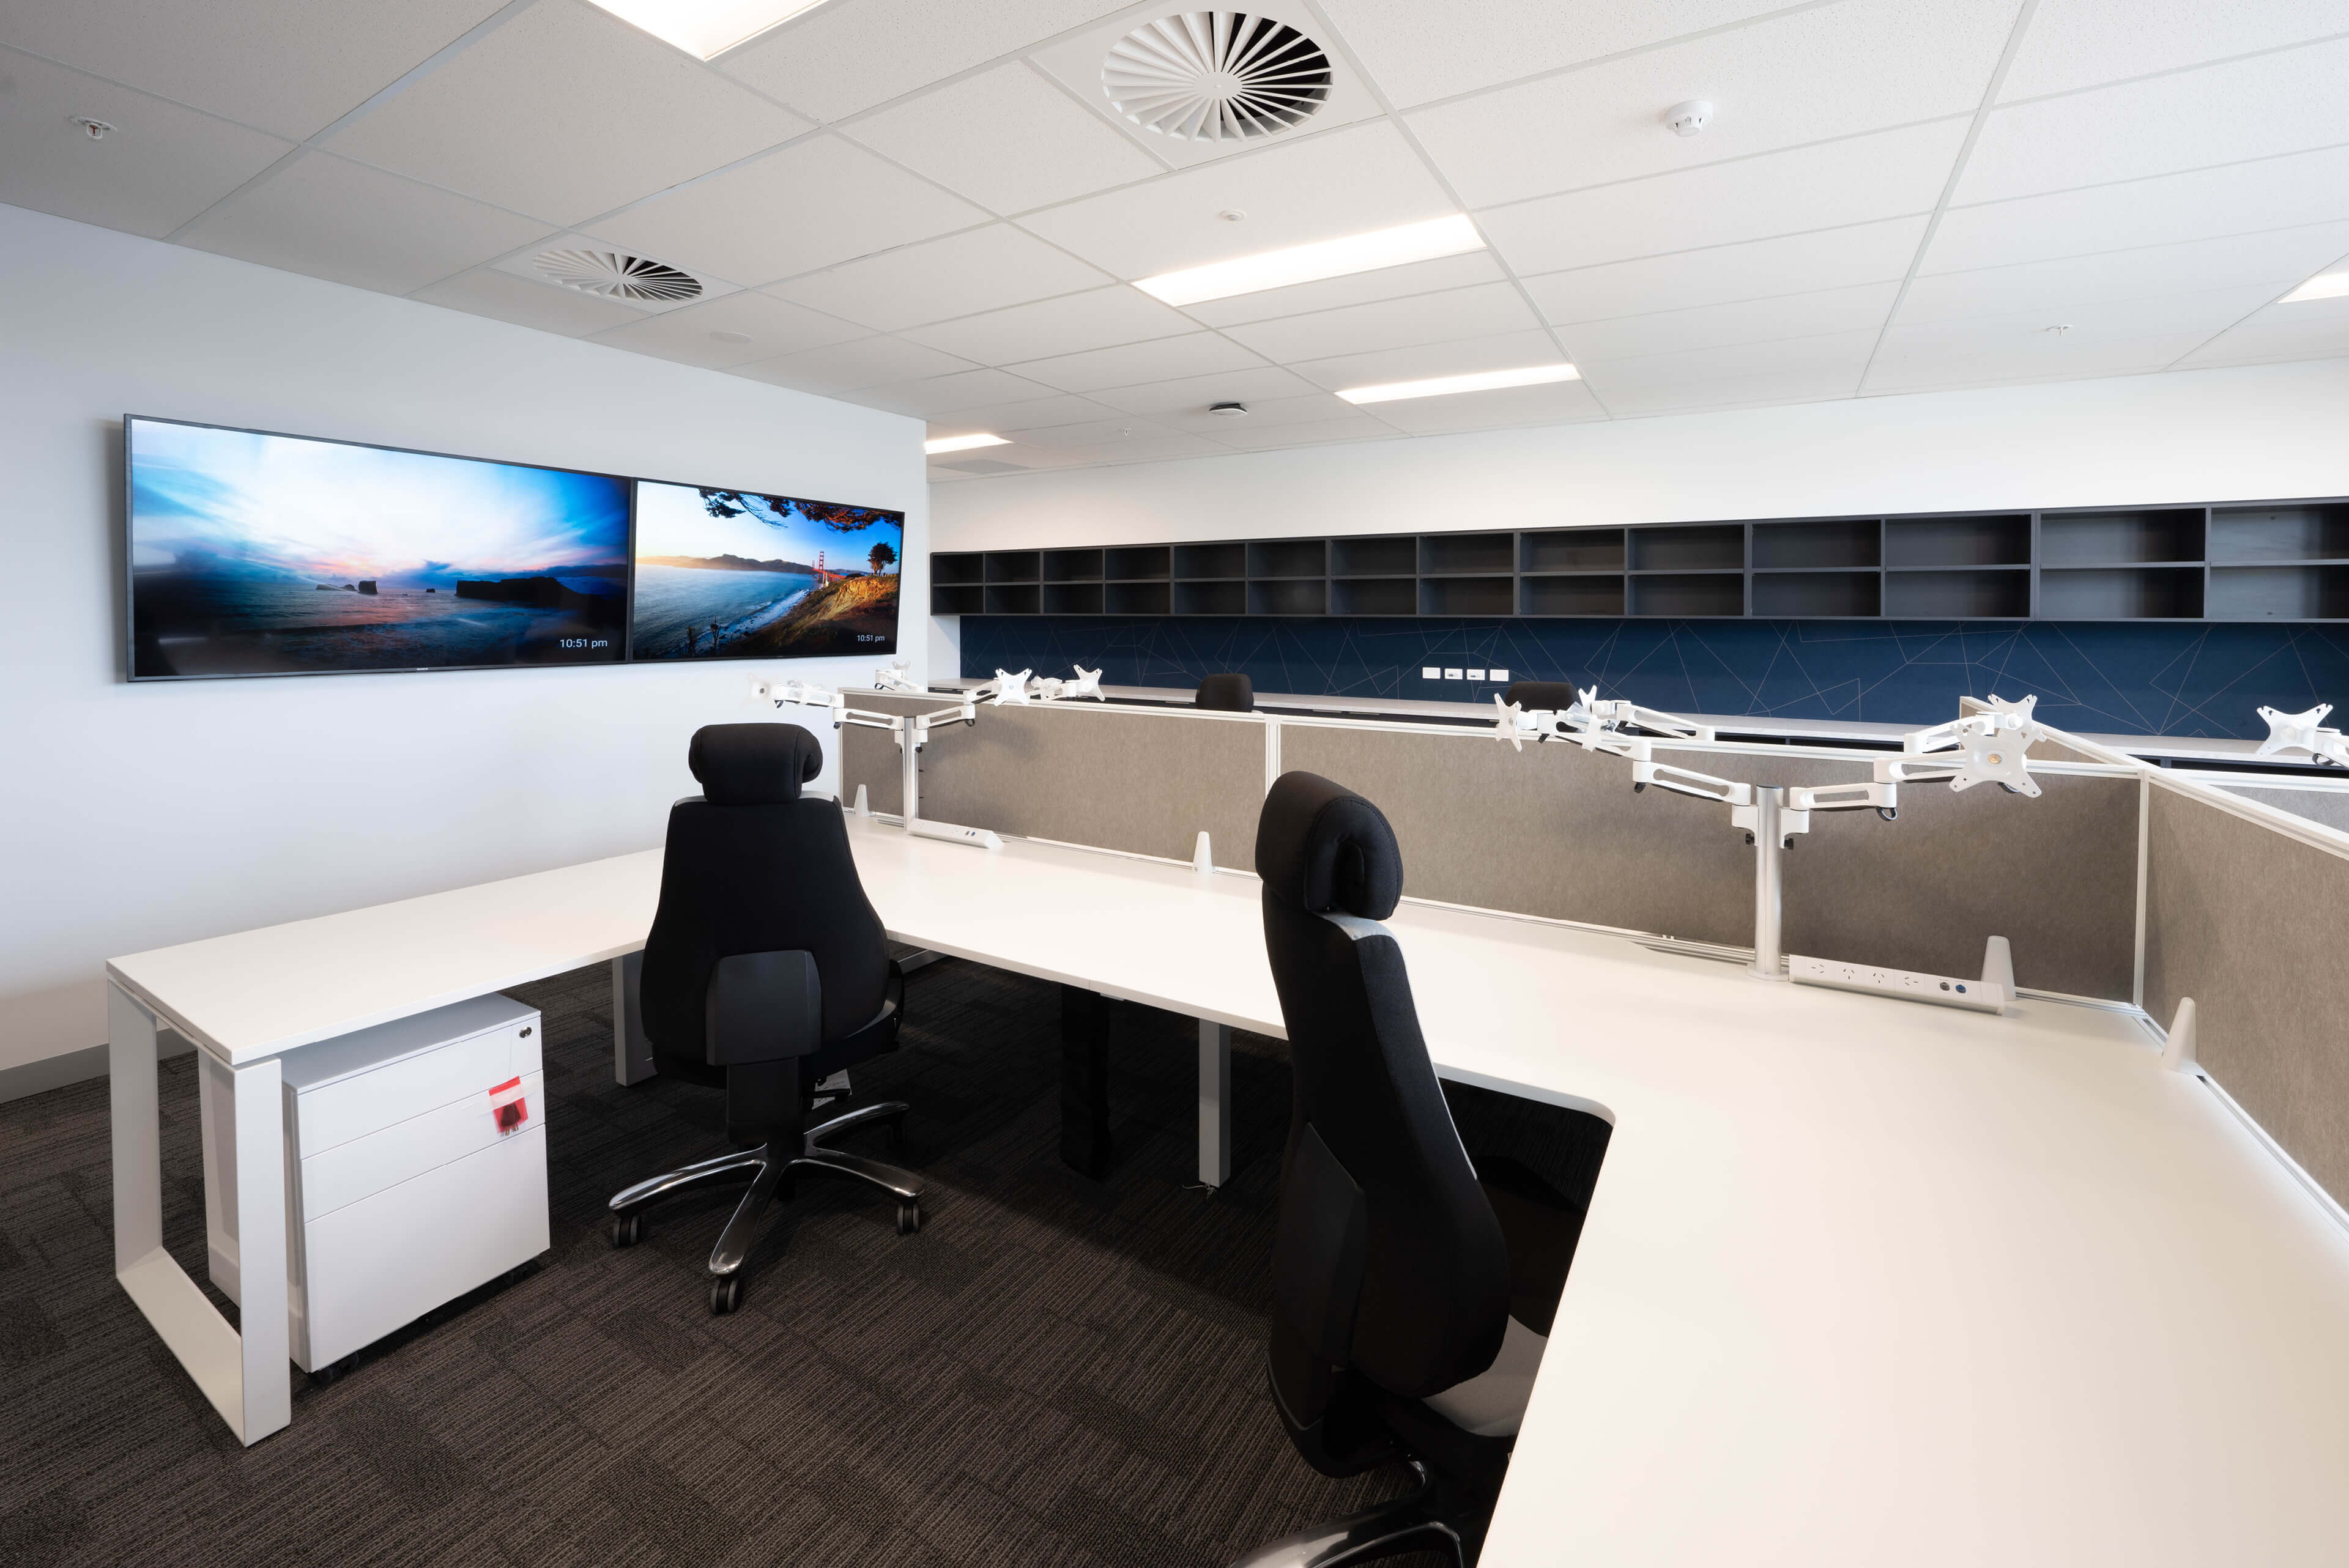 17 construction and fitout of 3000sqm office space at polair facility bankstown taylor construction refurbishment and live environments